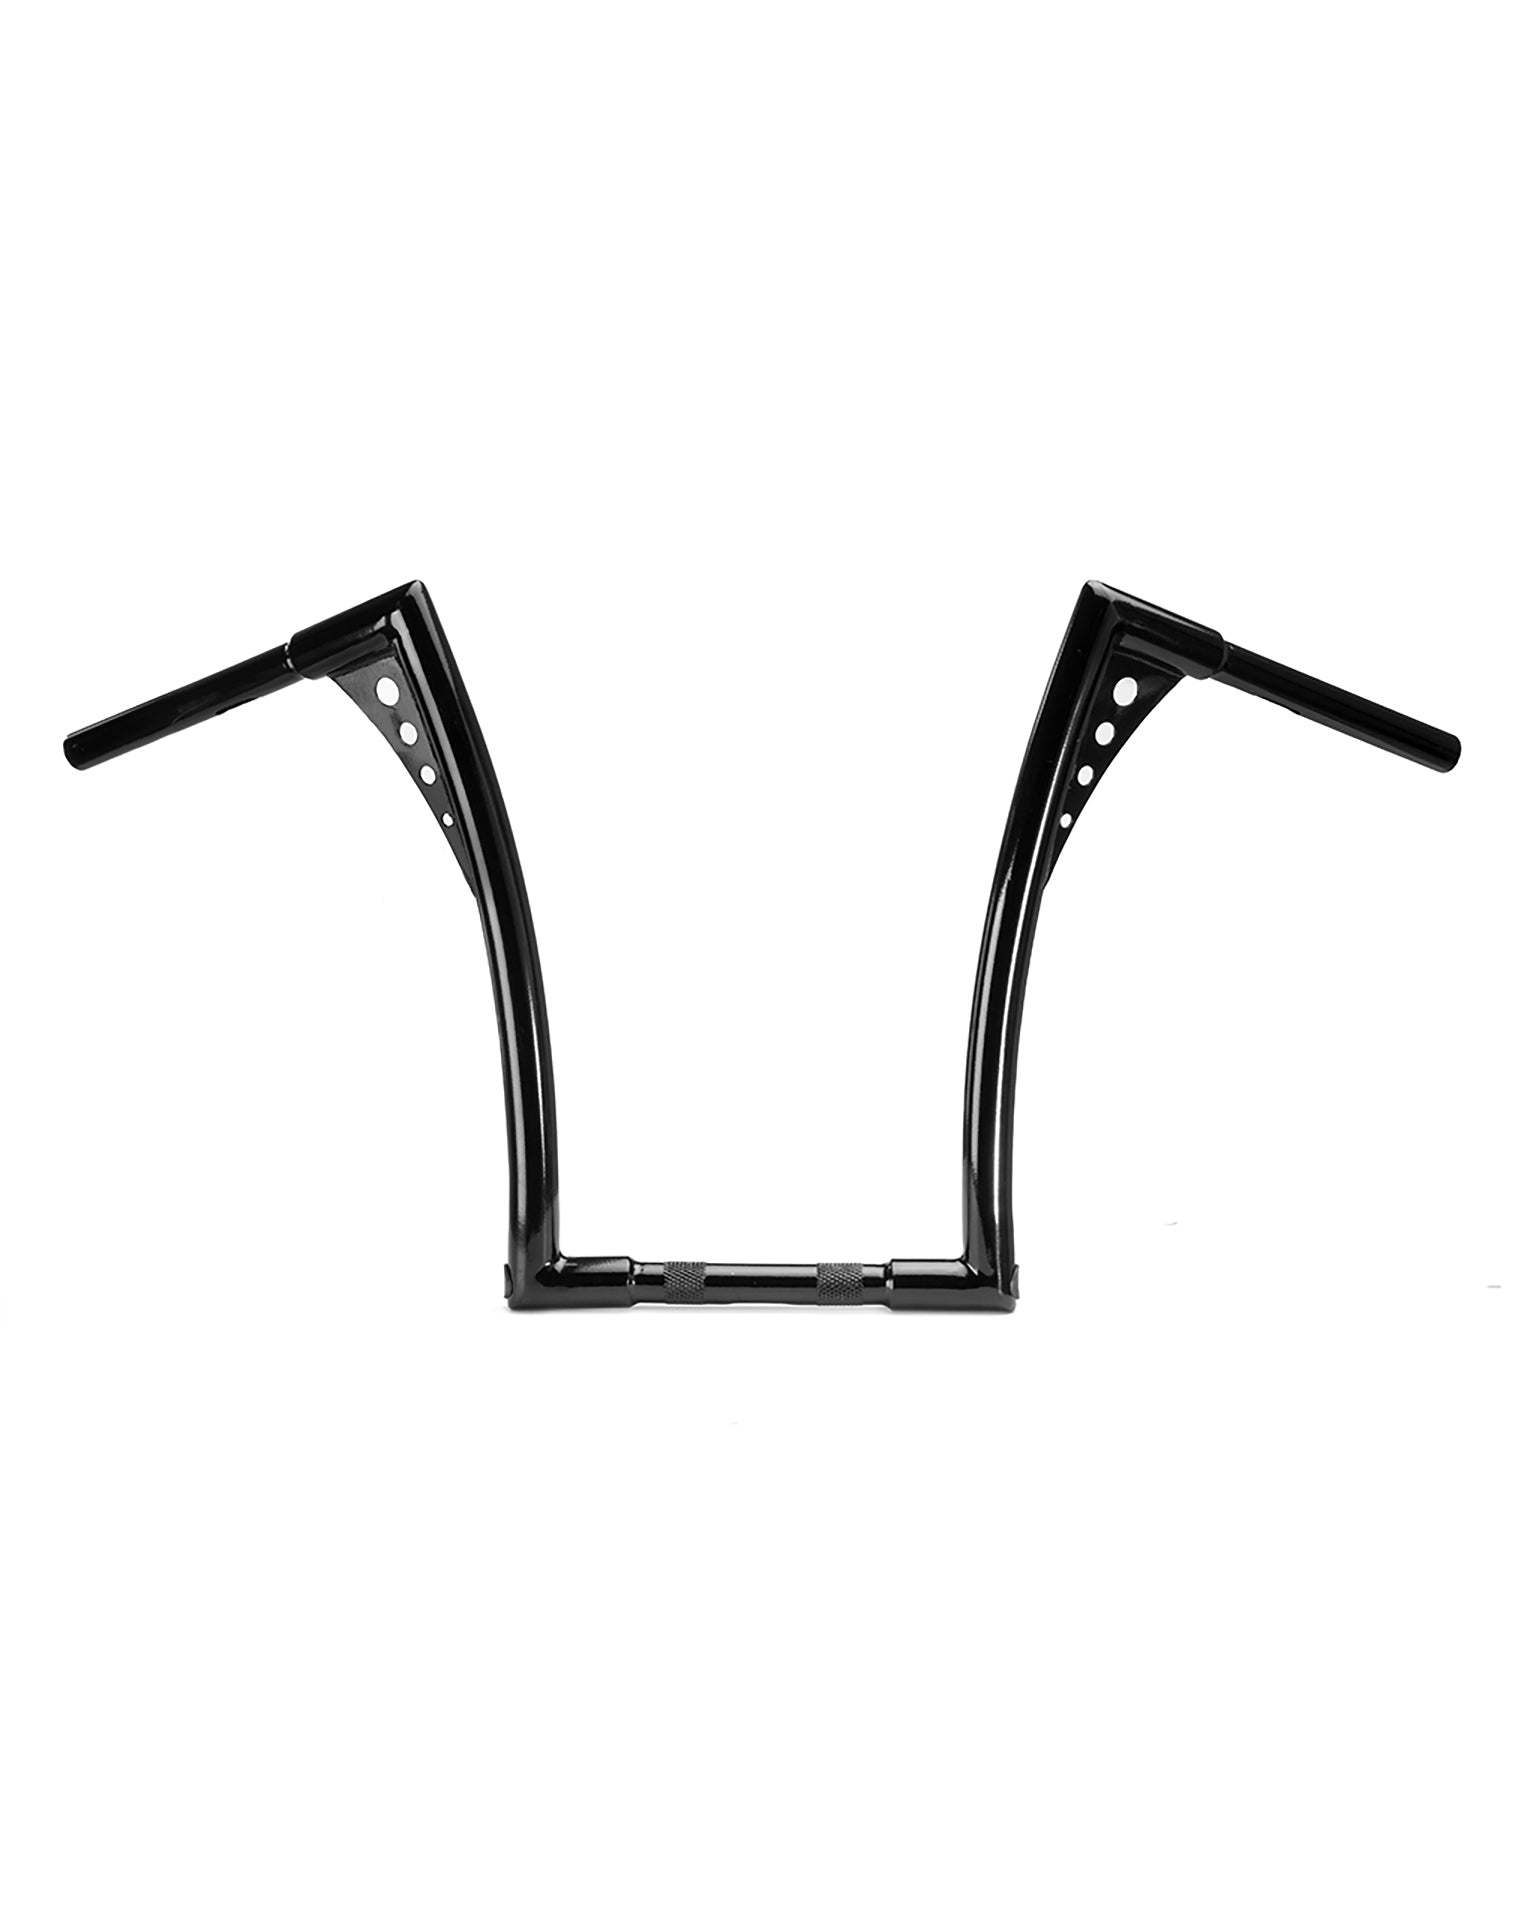 Viking Iron Born 12" Handlebar For Harley Dyna Low Rider FXDL Gloss Black Front View